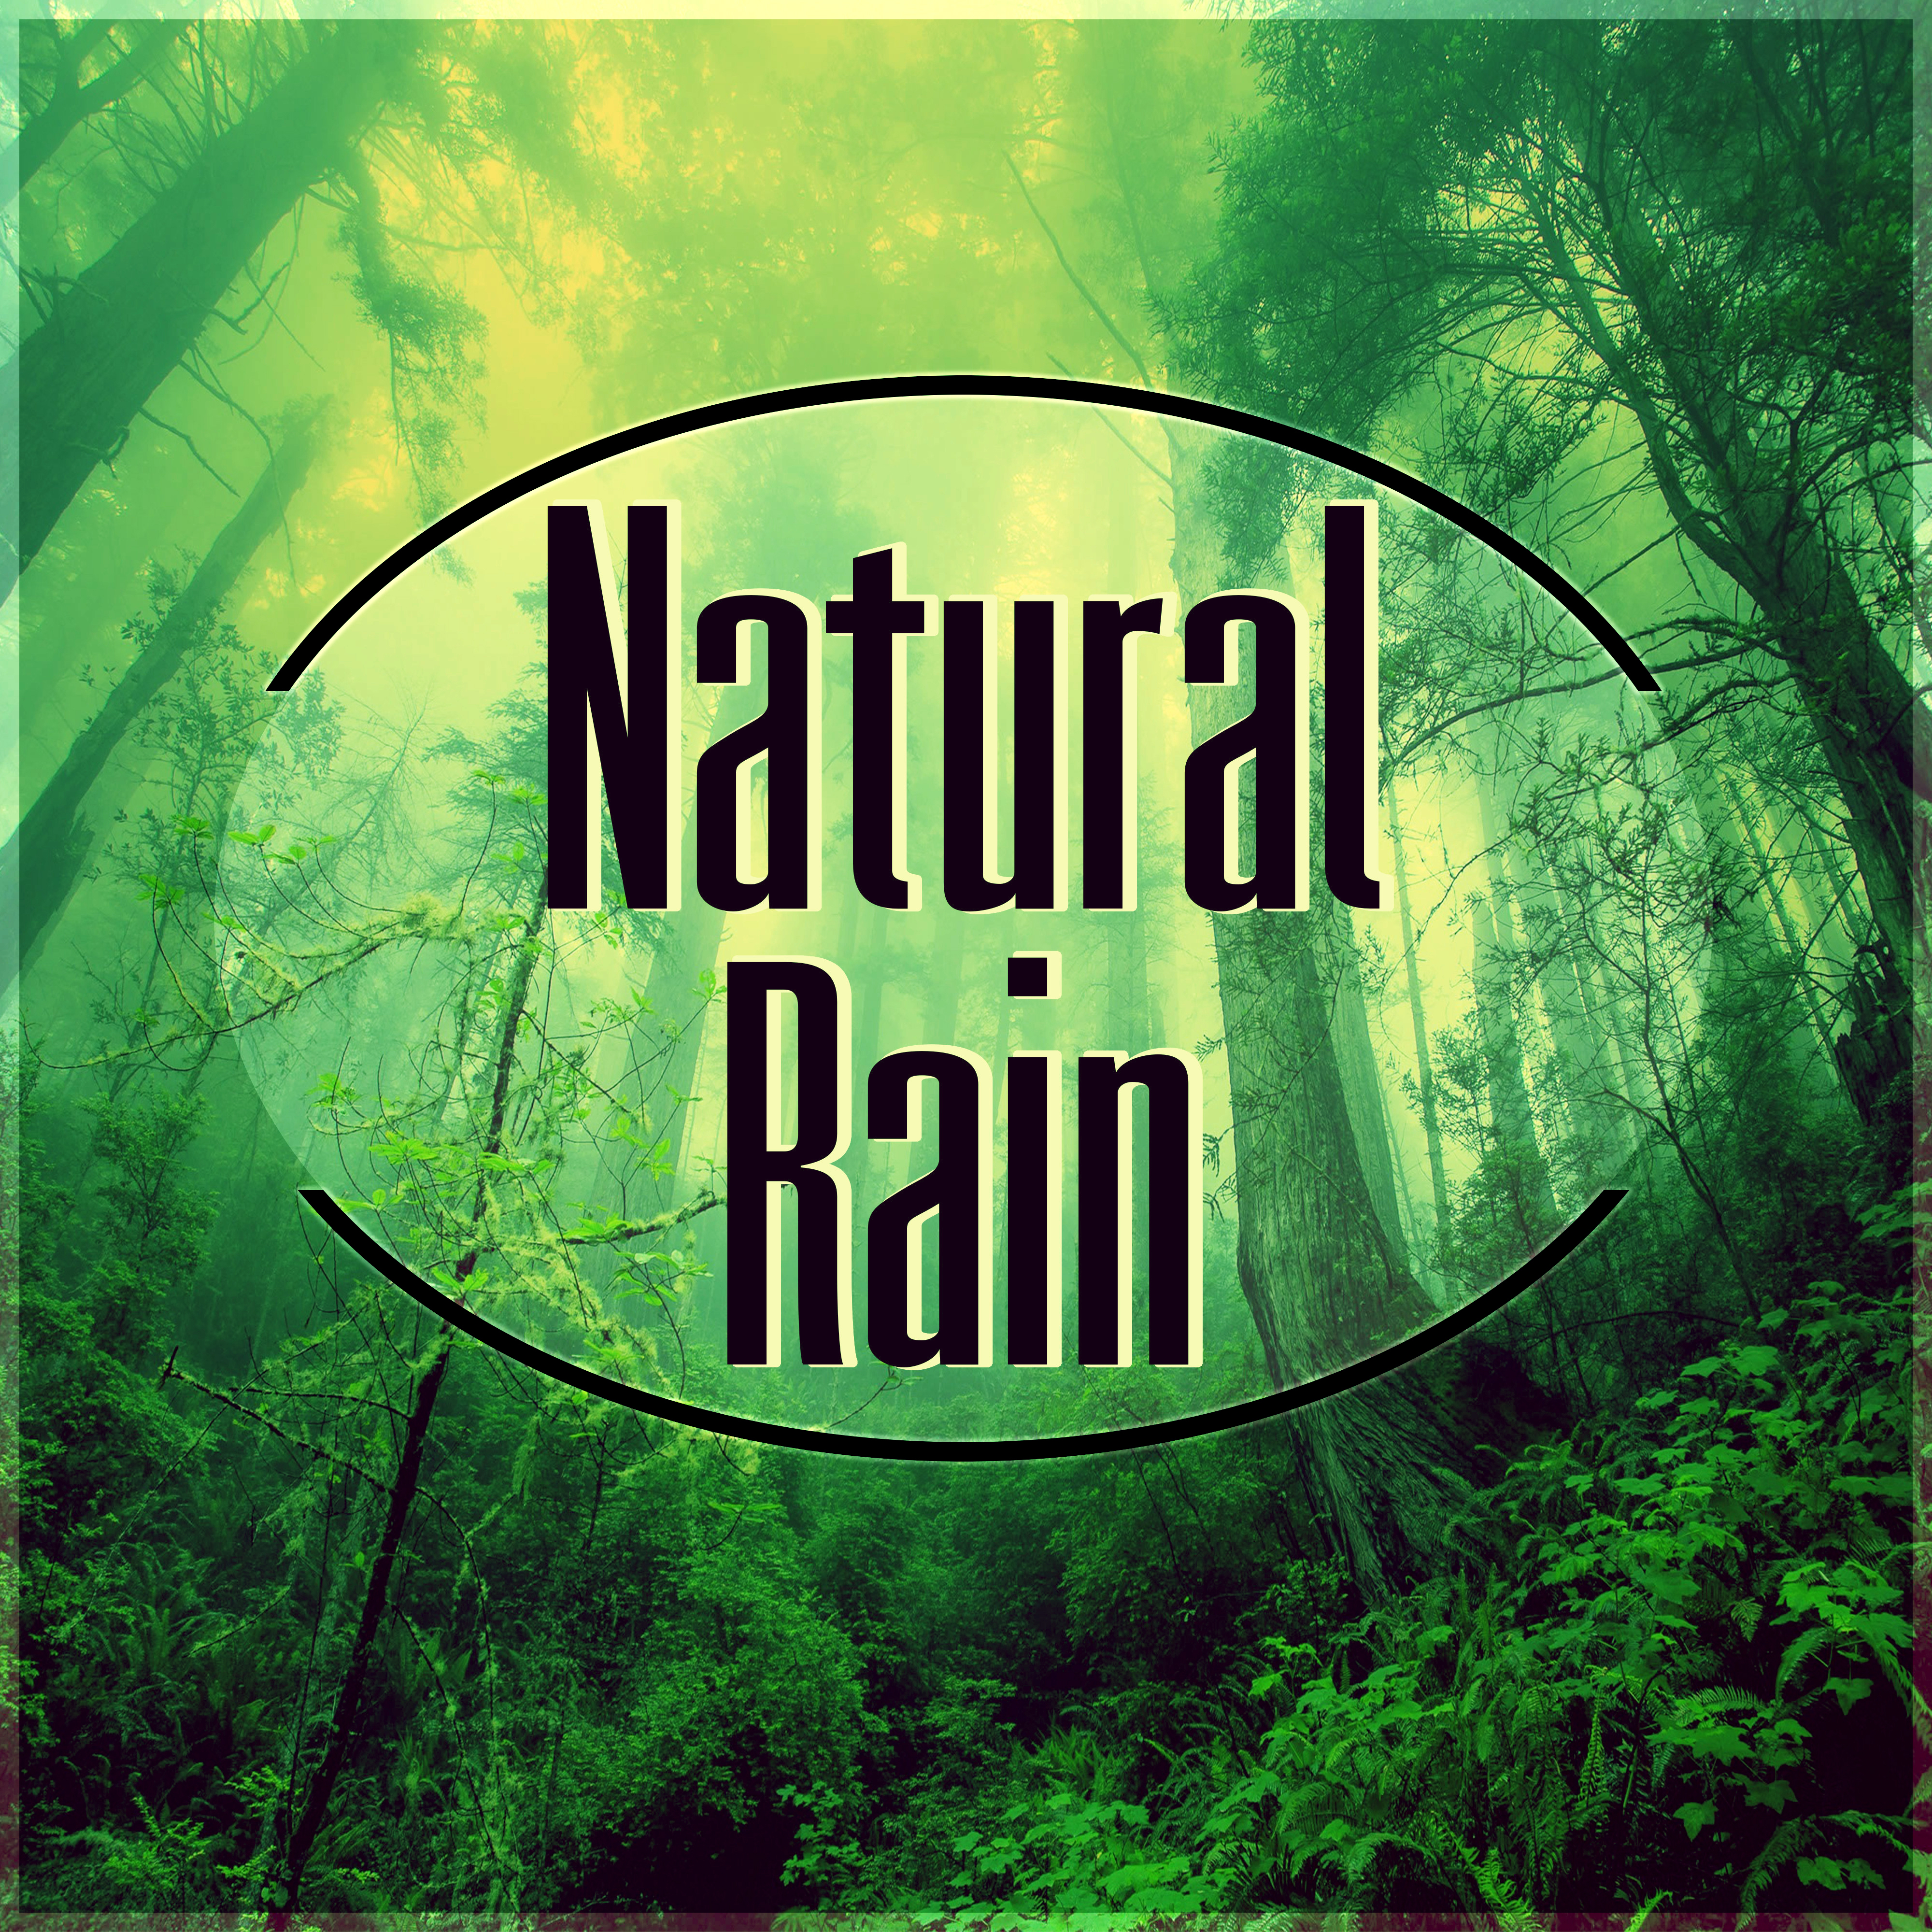 Natural Rain - Healing Music Therapy, Sound Therapy, Stress Relief, Healing Through Sound and Touch, Harmony of Senses, Rain Sounds for Massage, Meditation Before Sleep, Yoga Music